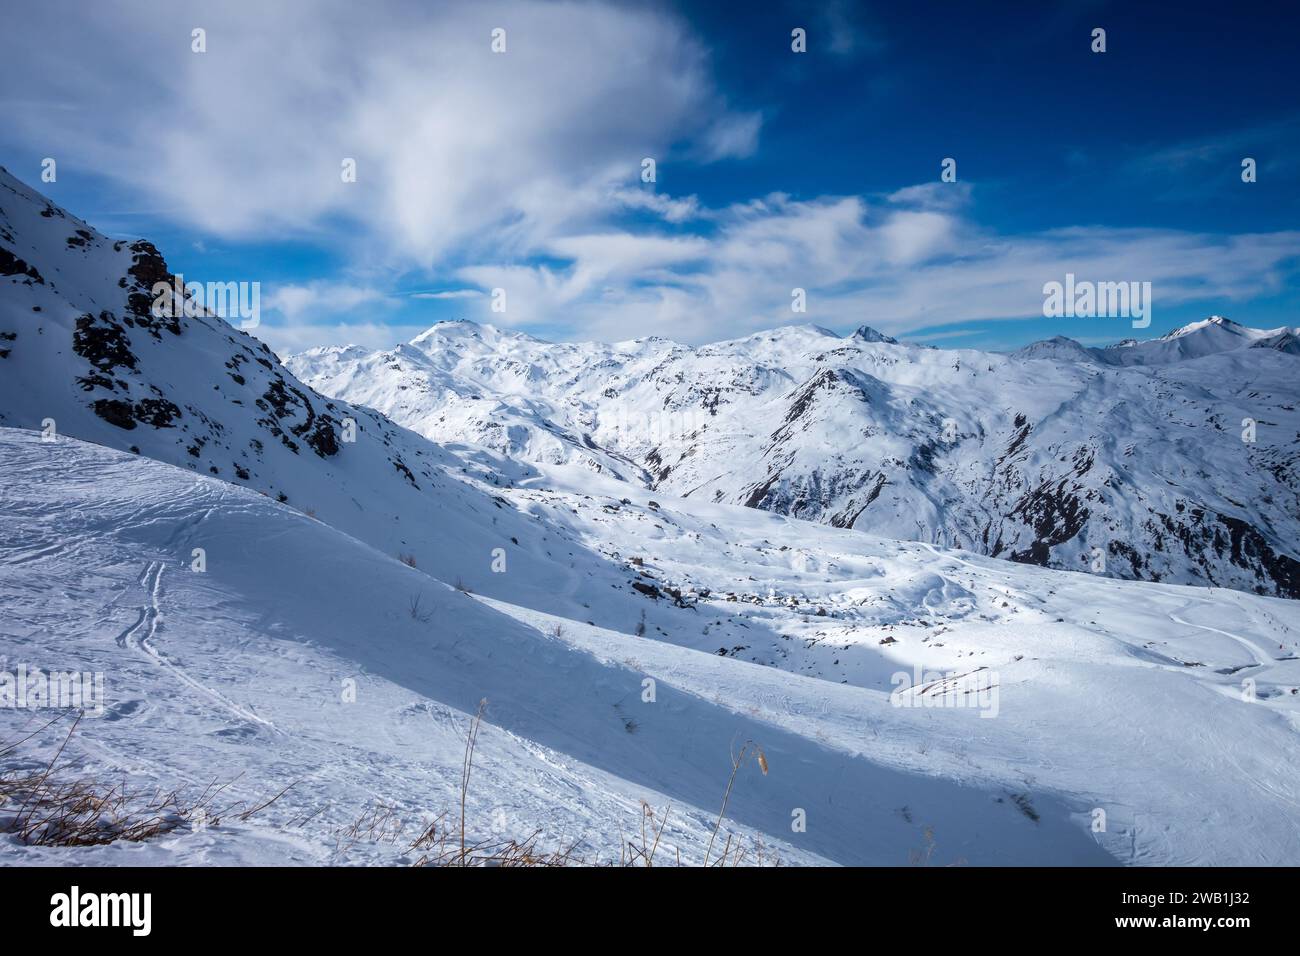 Ski slopes and mountains of Les Menuires resort in the french alps, France Stock Photo